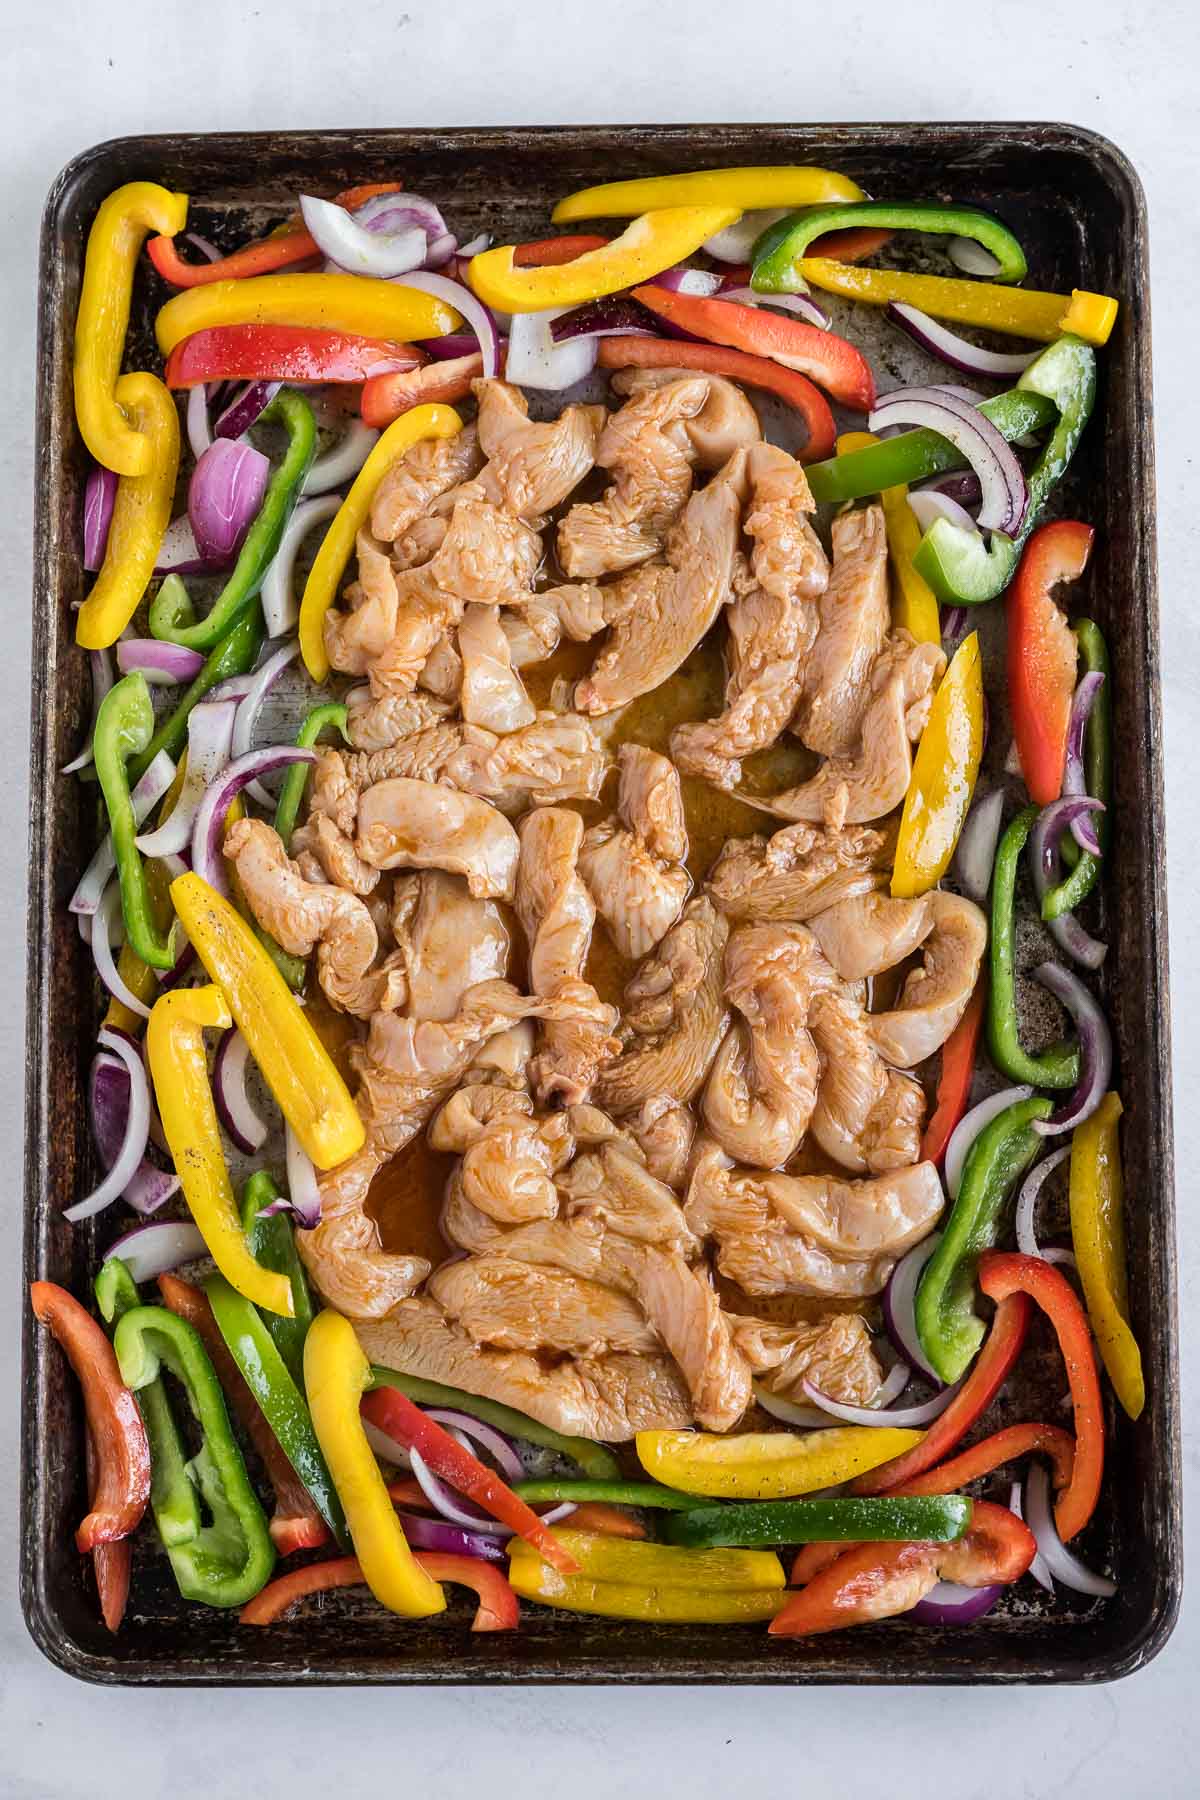 Chicken and vegetables are on a sheet pan.